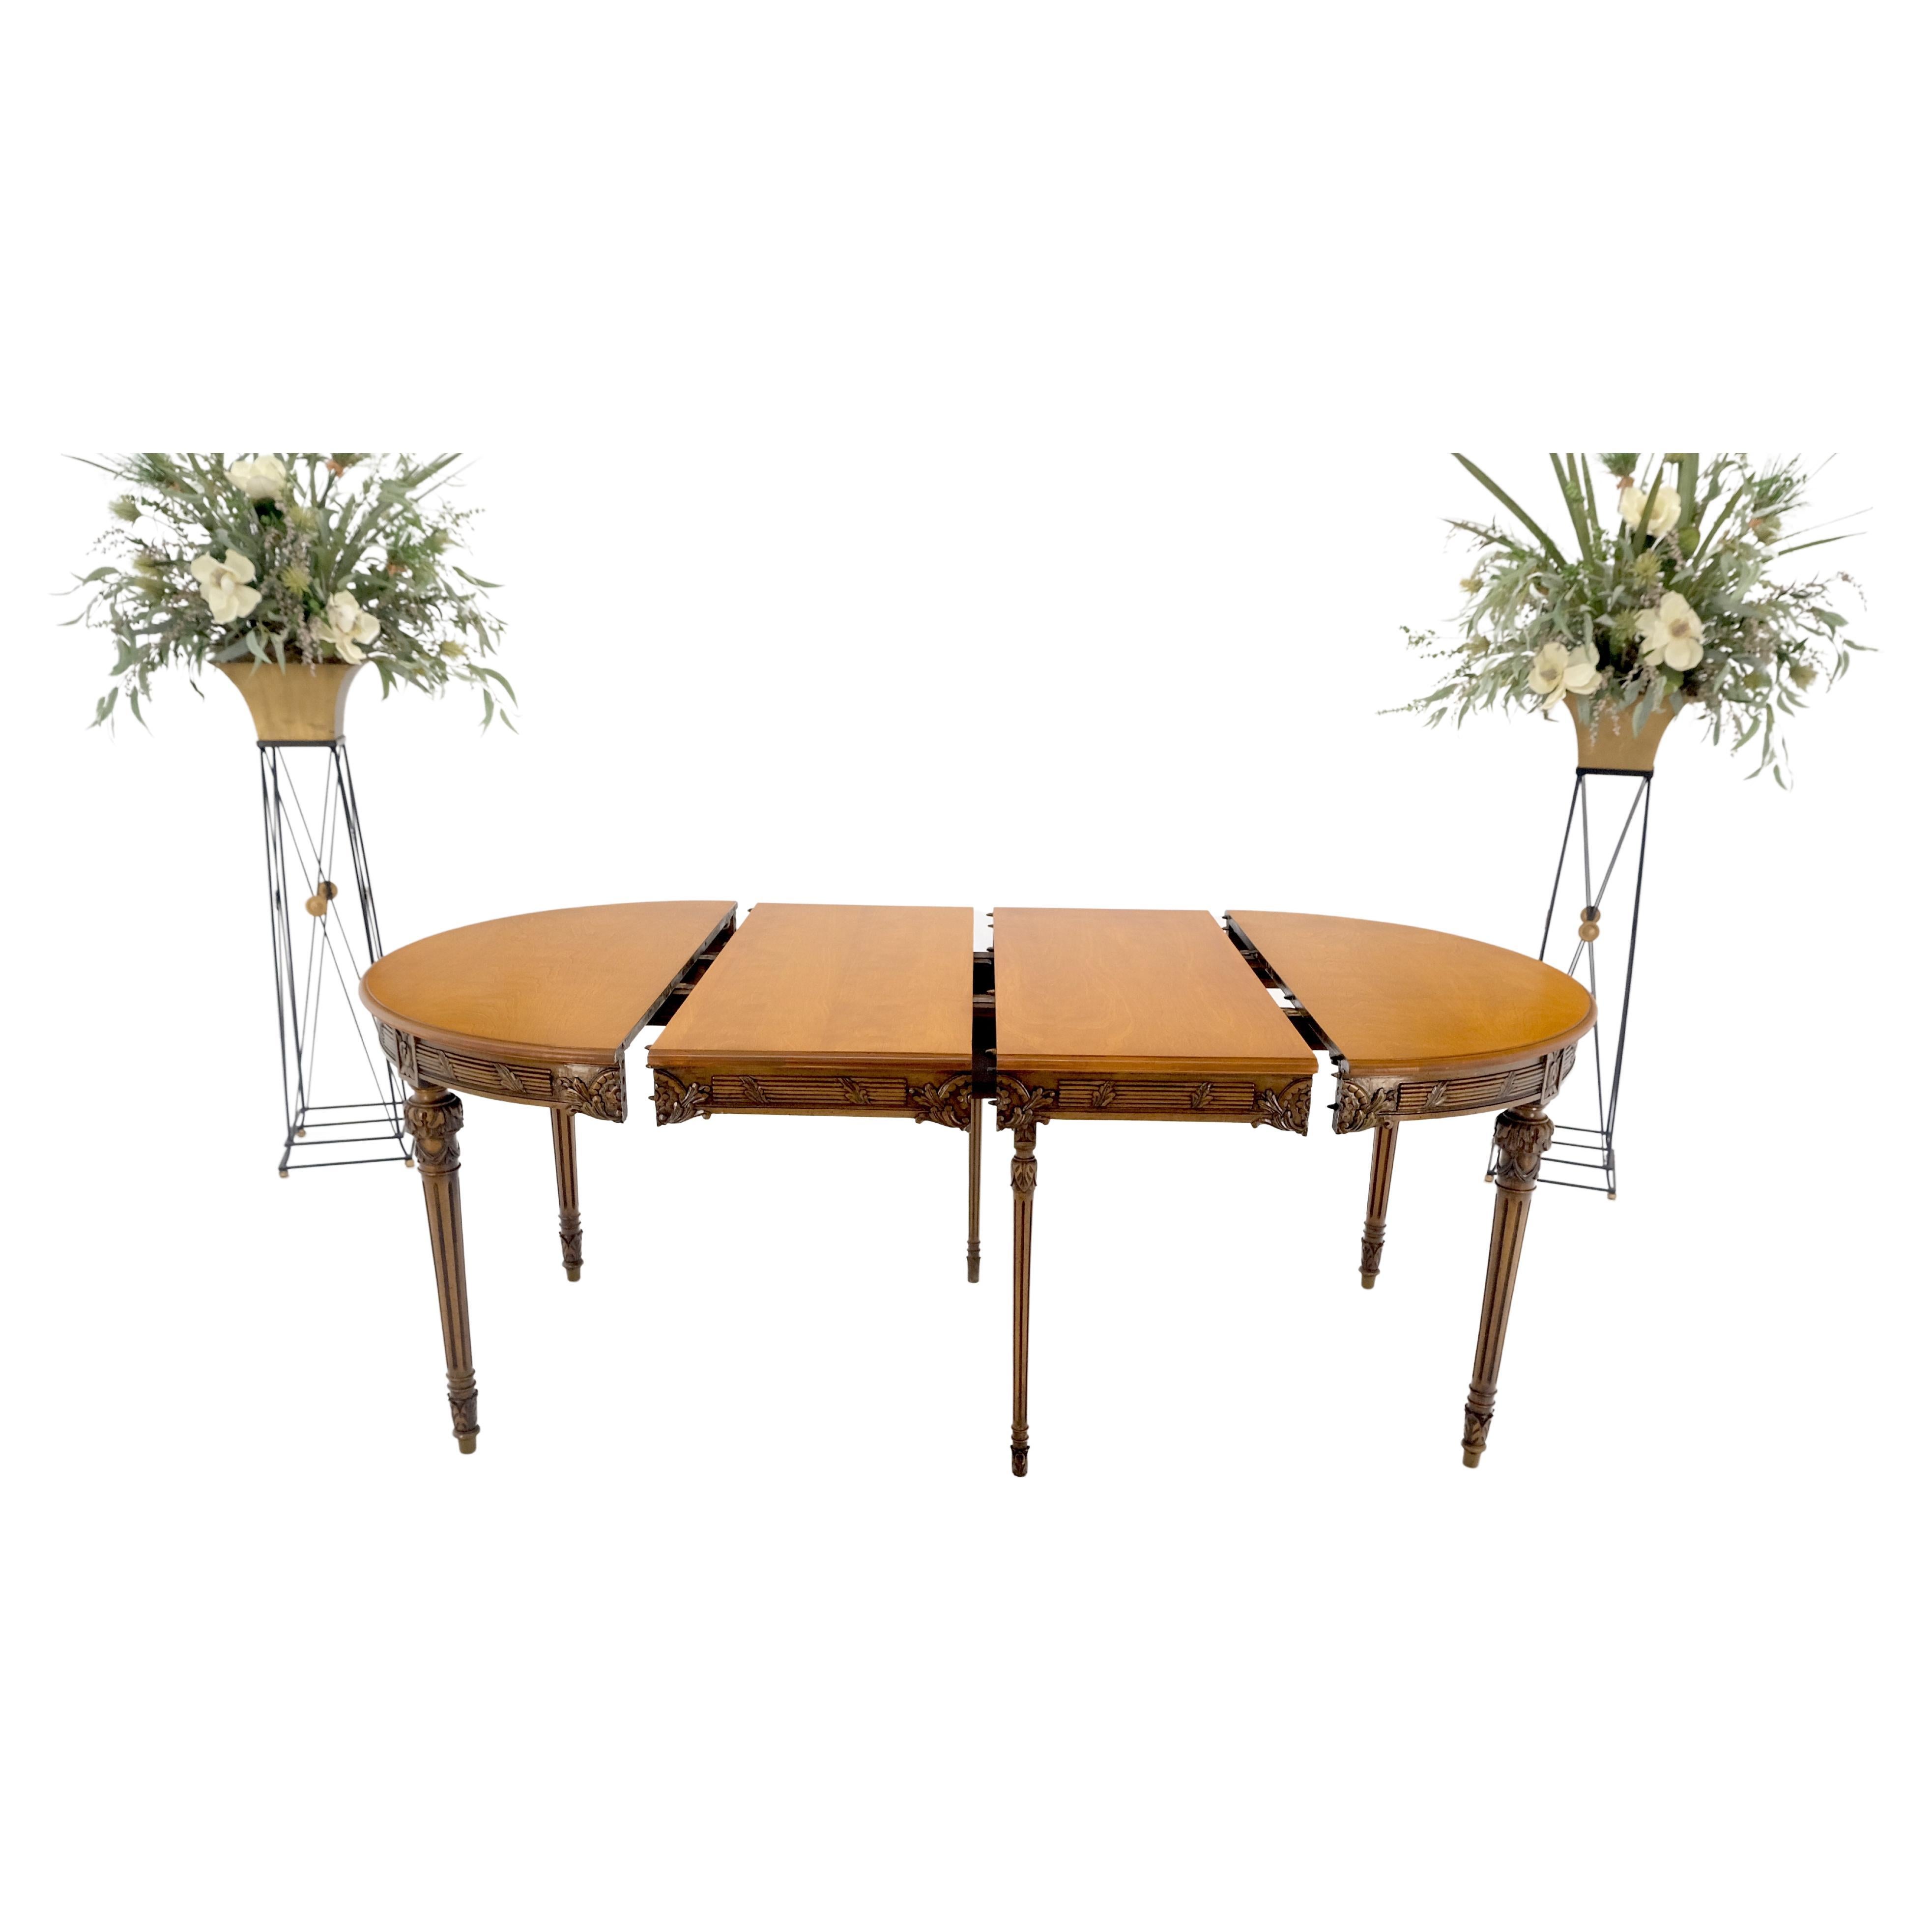 Two Tone Olive and Amber Finihs Round Racetrack w/ Two Large Leaves Carved Finish Dining Table MINT!
2x18